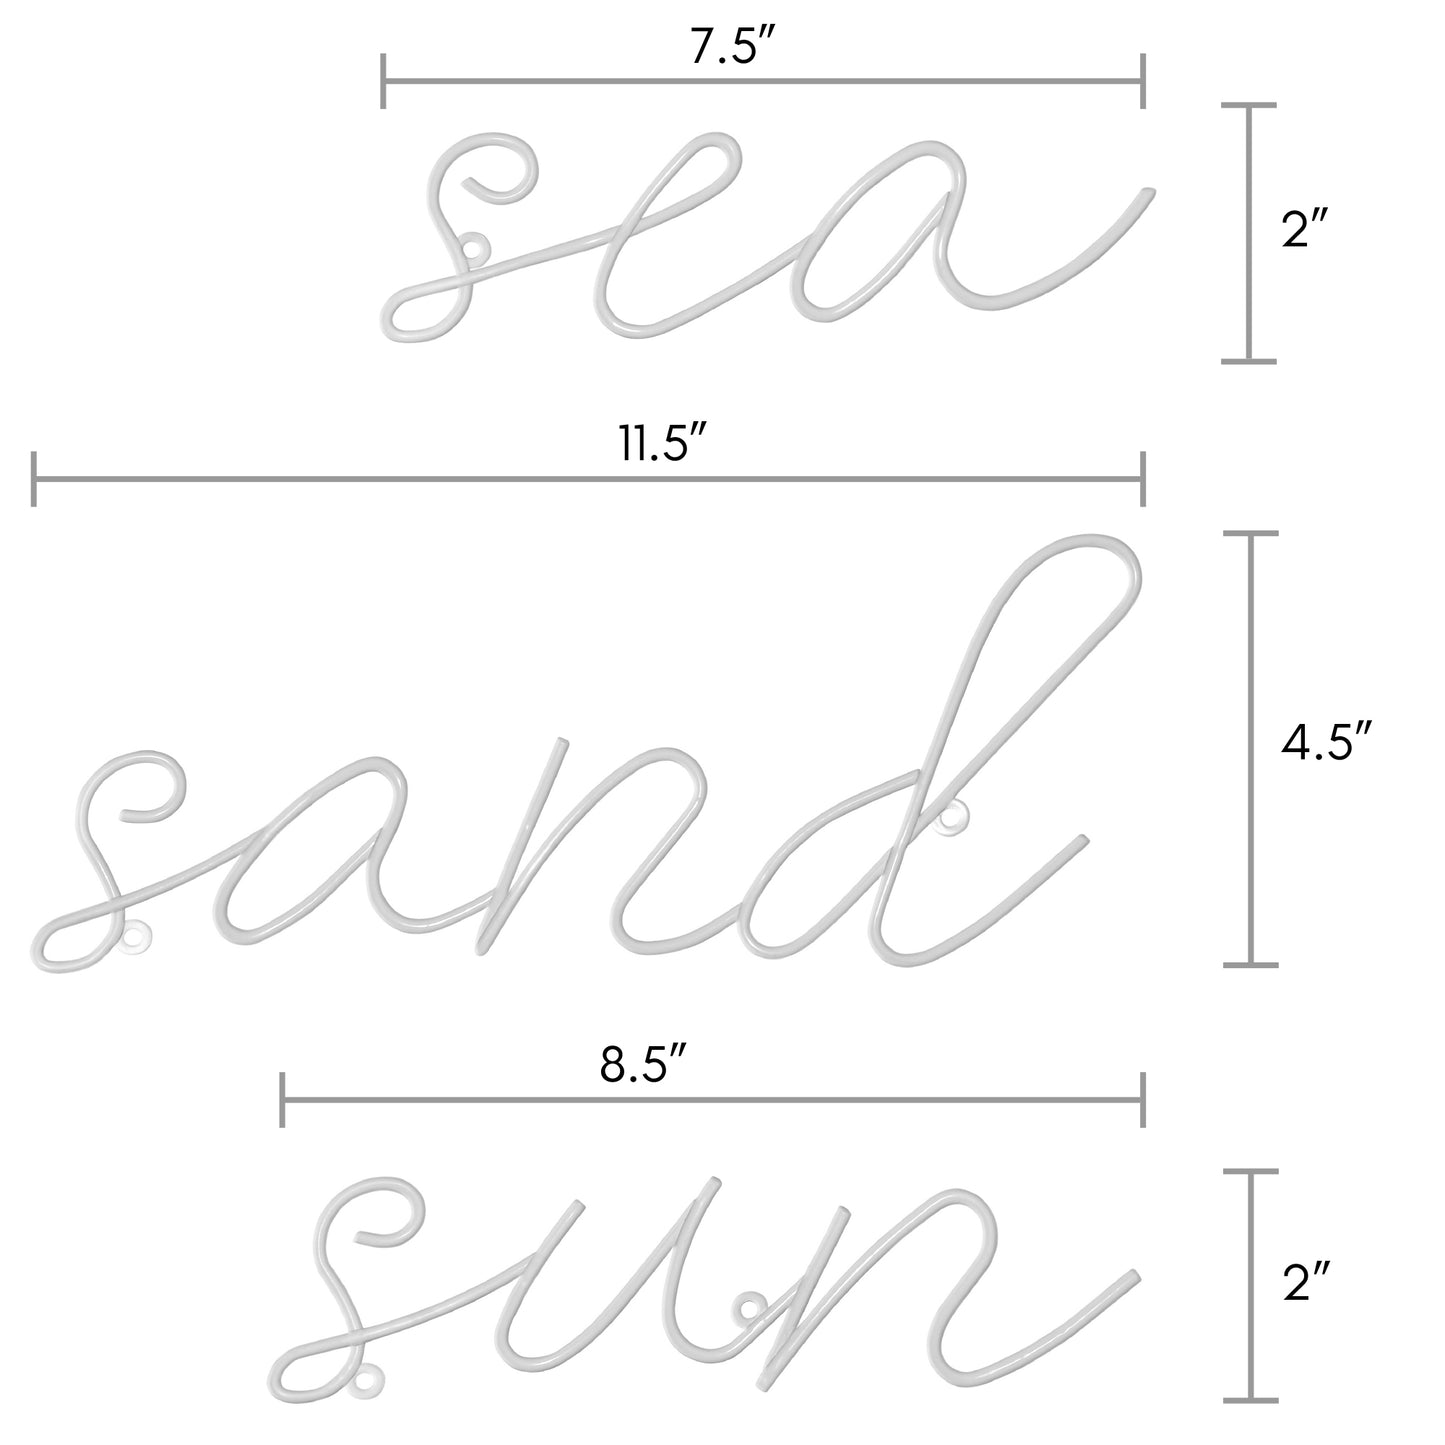 Americanflat - Sea Sand Sun Metal Line Art Wall Decor Sculpture Accents for Bedroom - Modern wall decor with Real Metal Abstract Wall Art - Single Line Minimalist Decor Sturdy Iron Hanging Decor